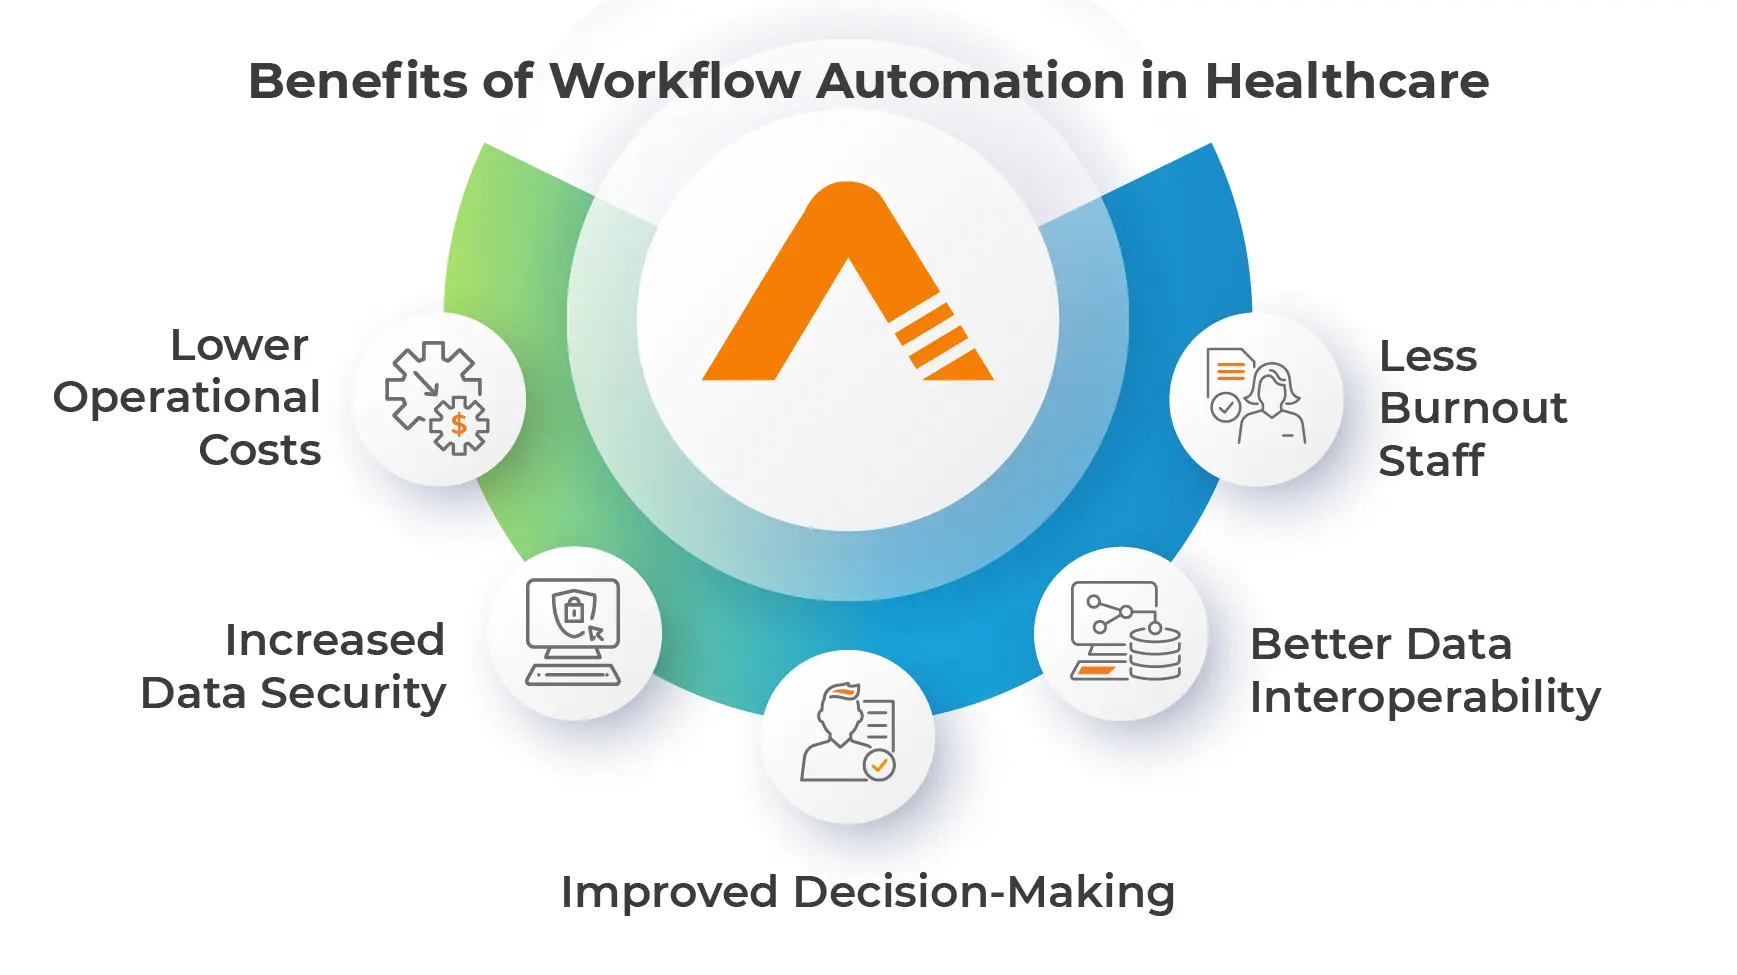 Benefits of Workflow Automation in Healthcare